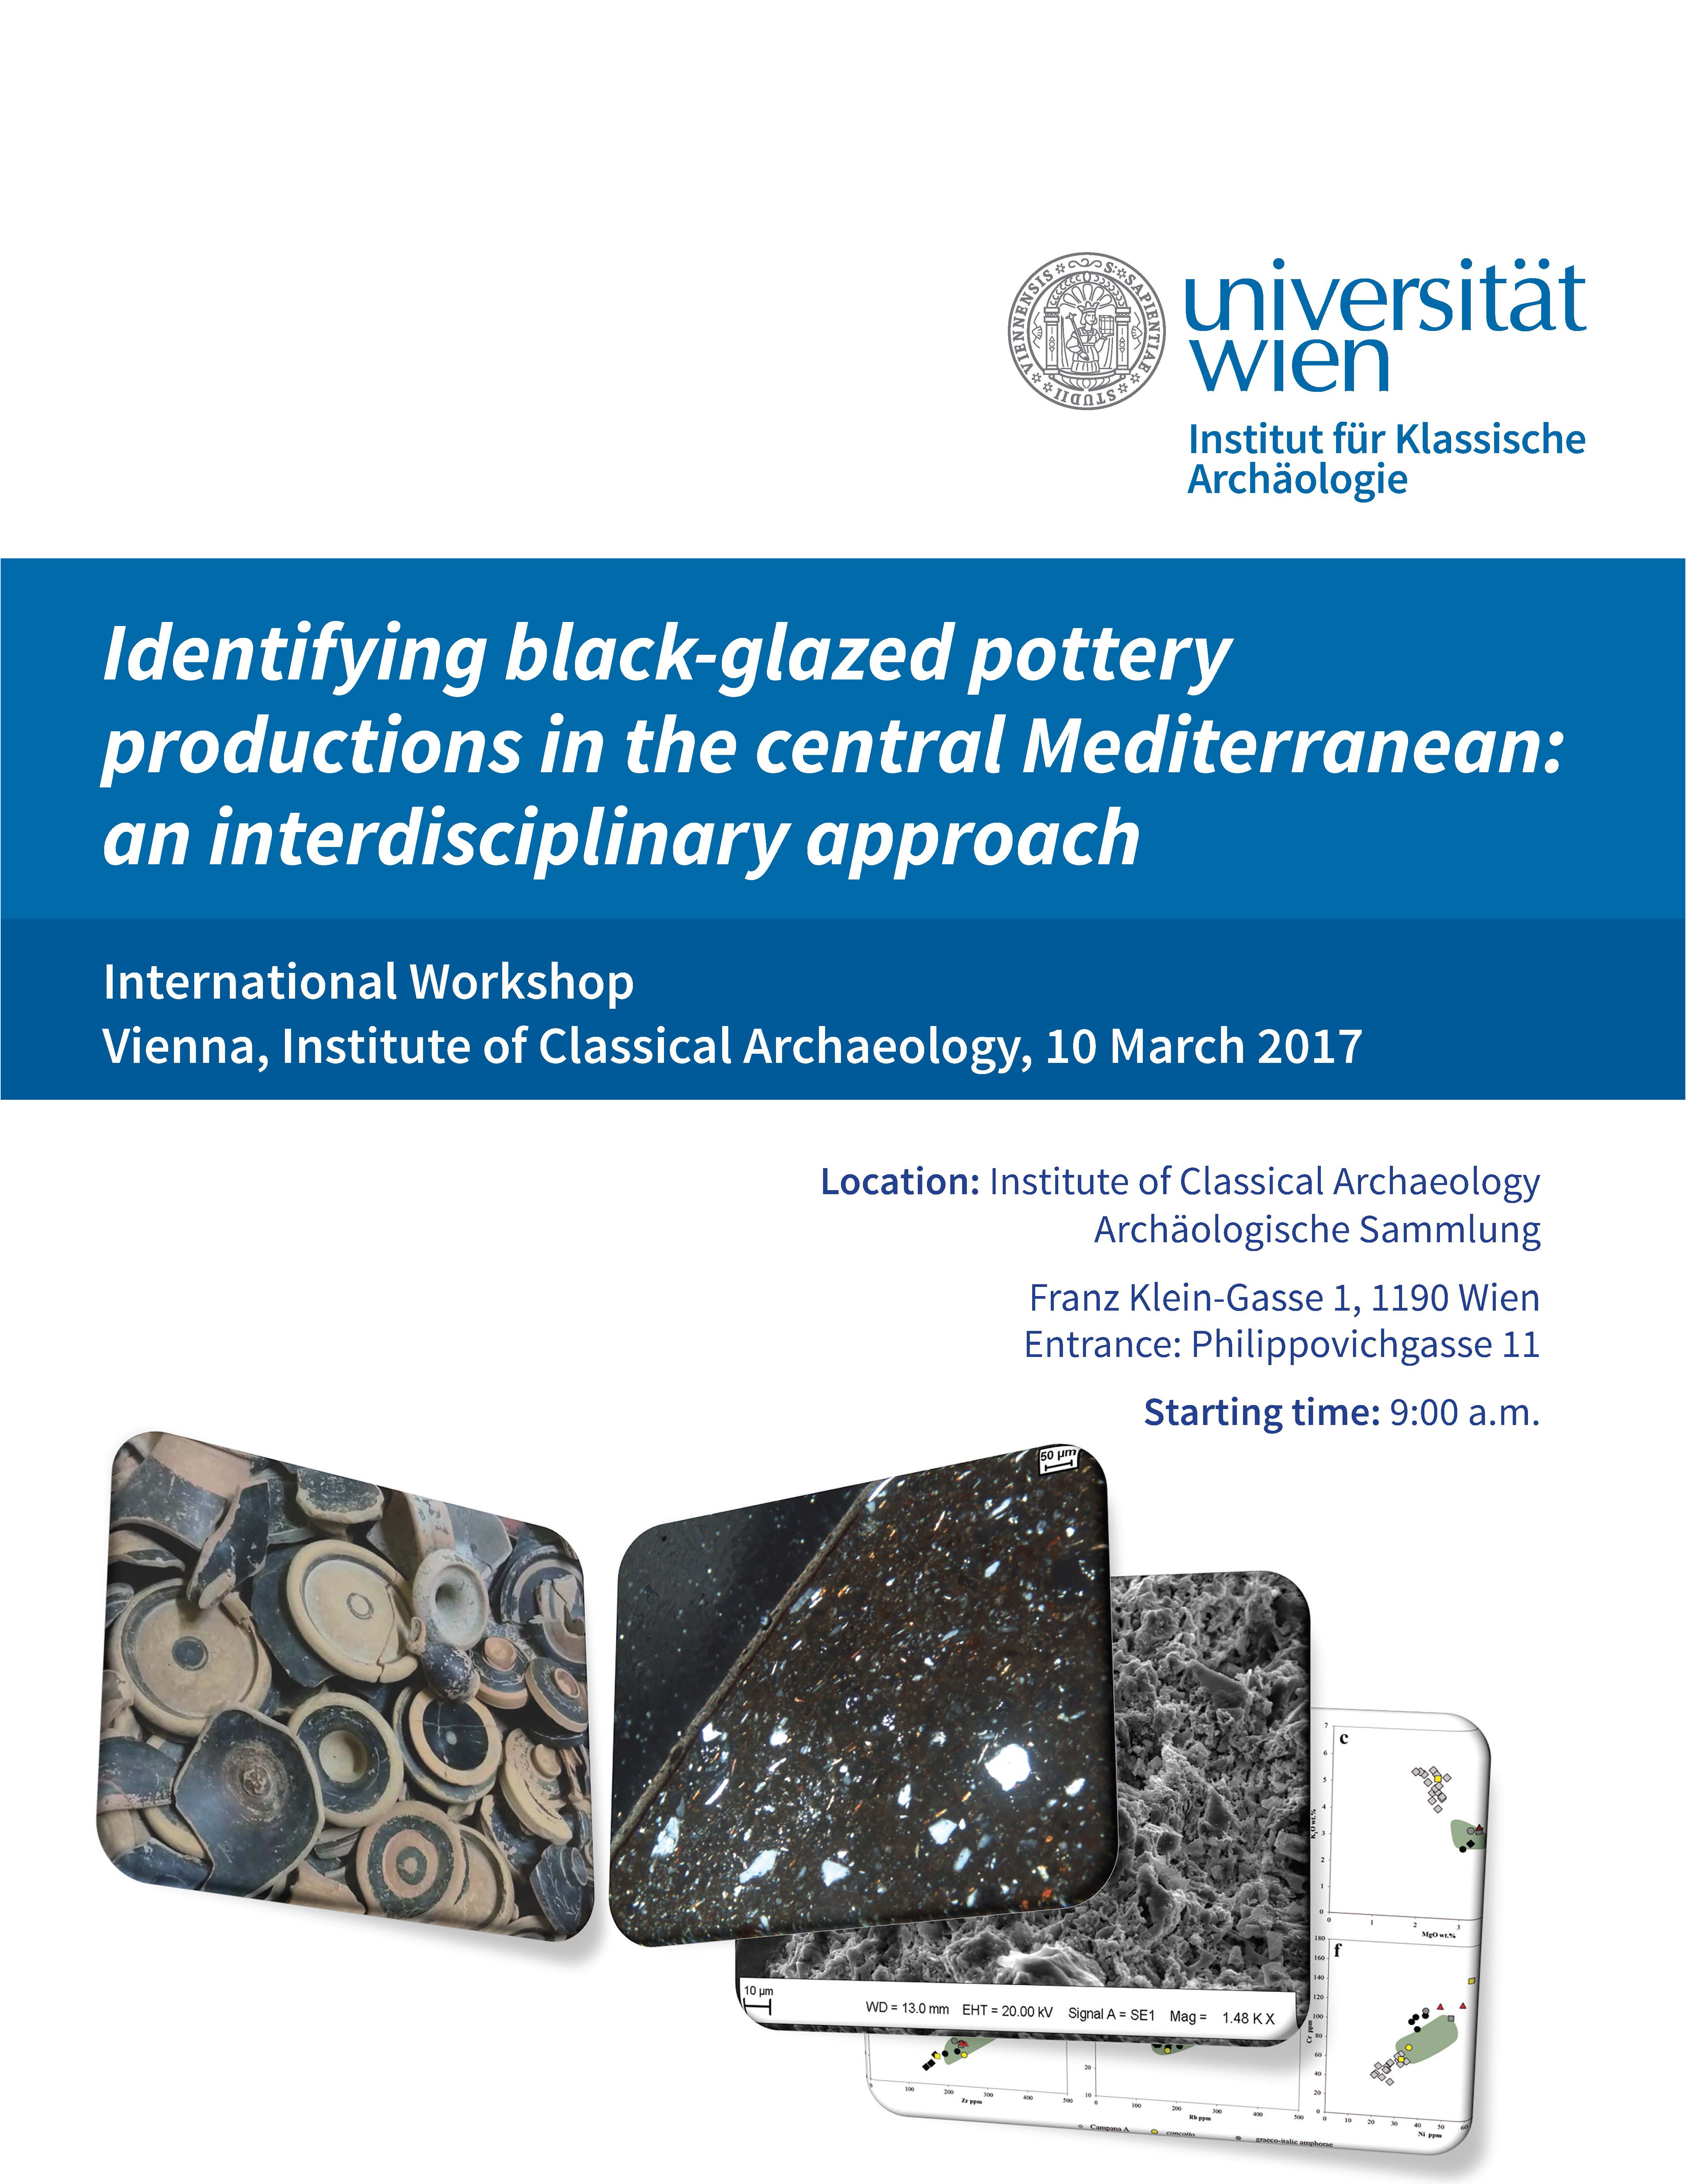 Identifying black-glazed pottery productions in the central Mediterranean: an interdisciplinary approach